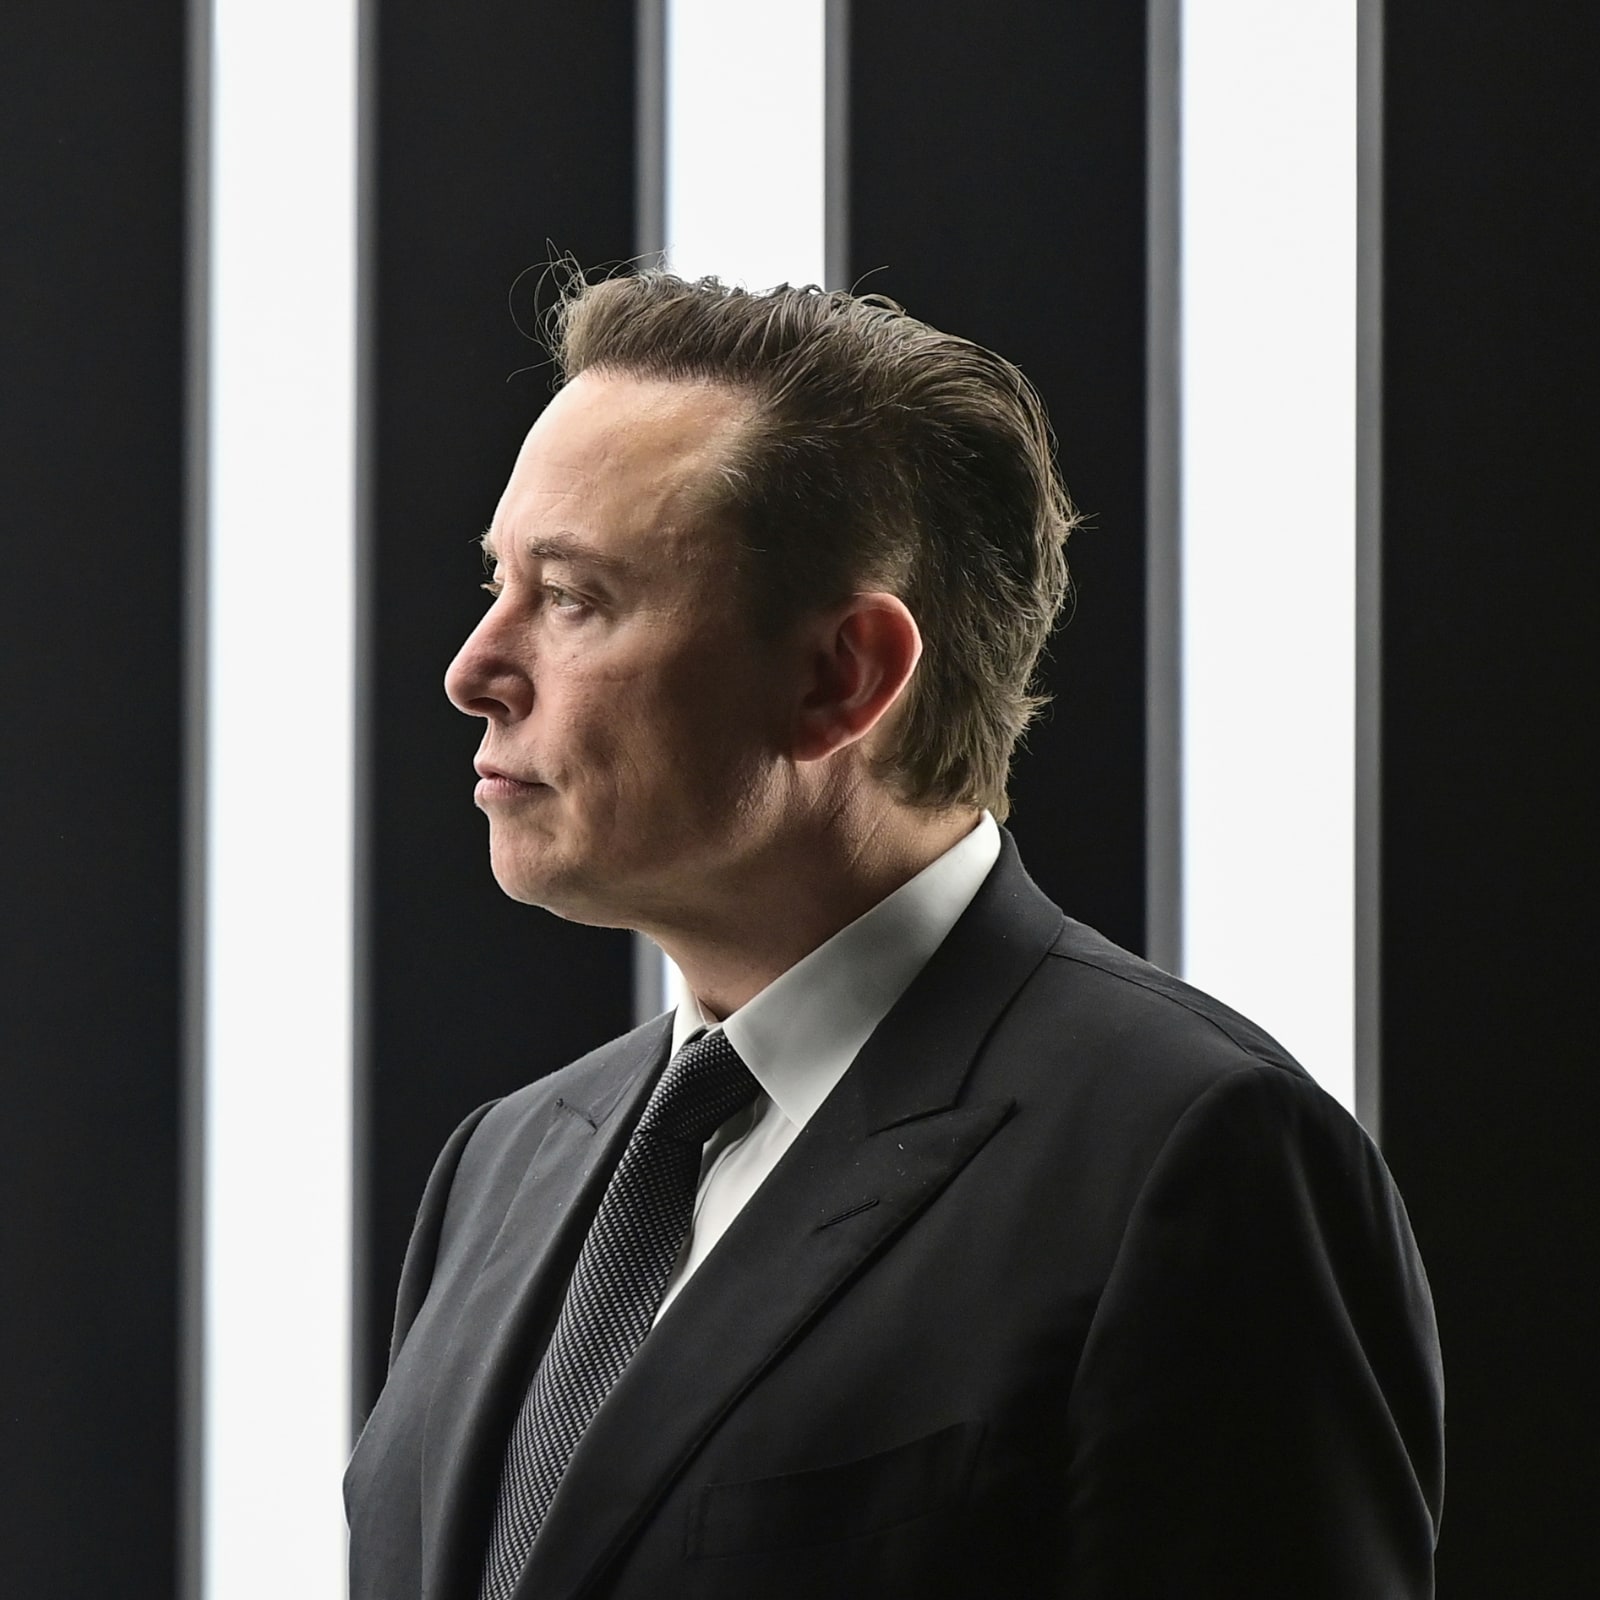 Elon Musk Ousts Jeff Bezos To Become The World's Richest Person - Forbes  India